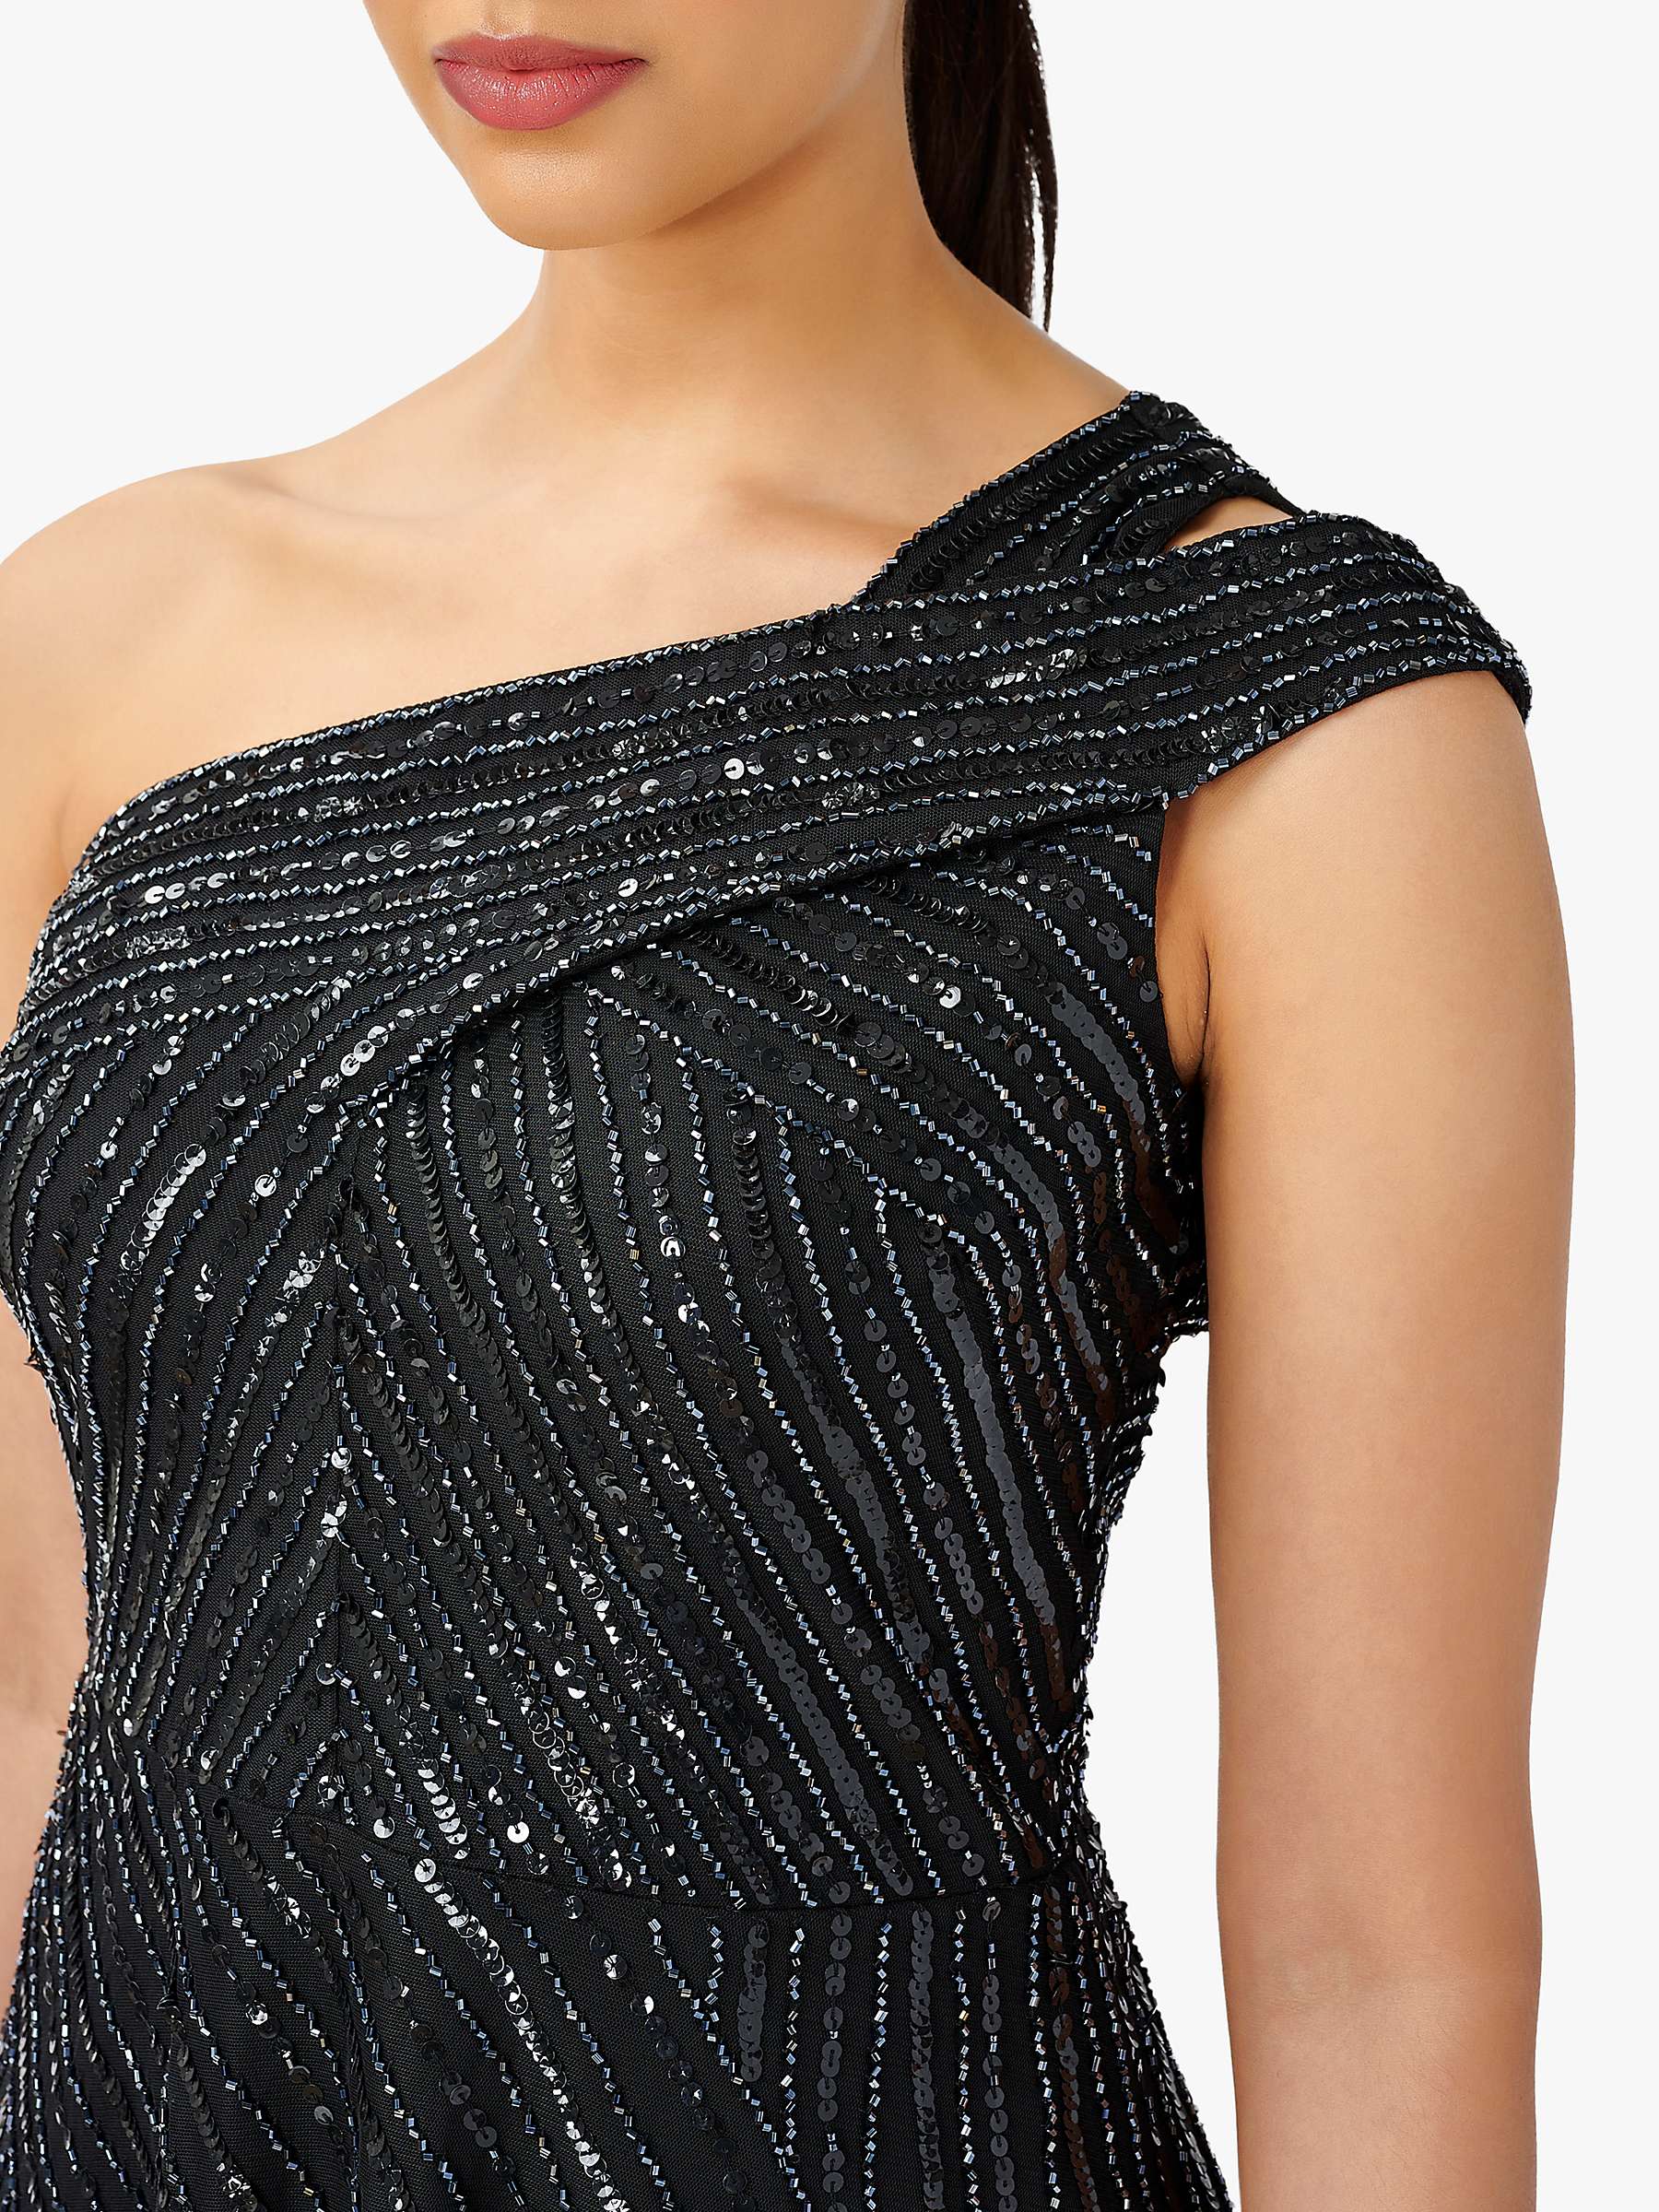 Adrianna Papell Beaded One Shoulder Black at John Lewis Partners